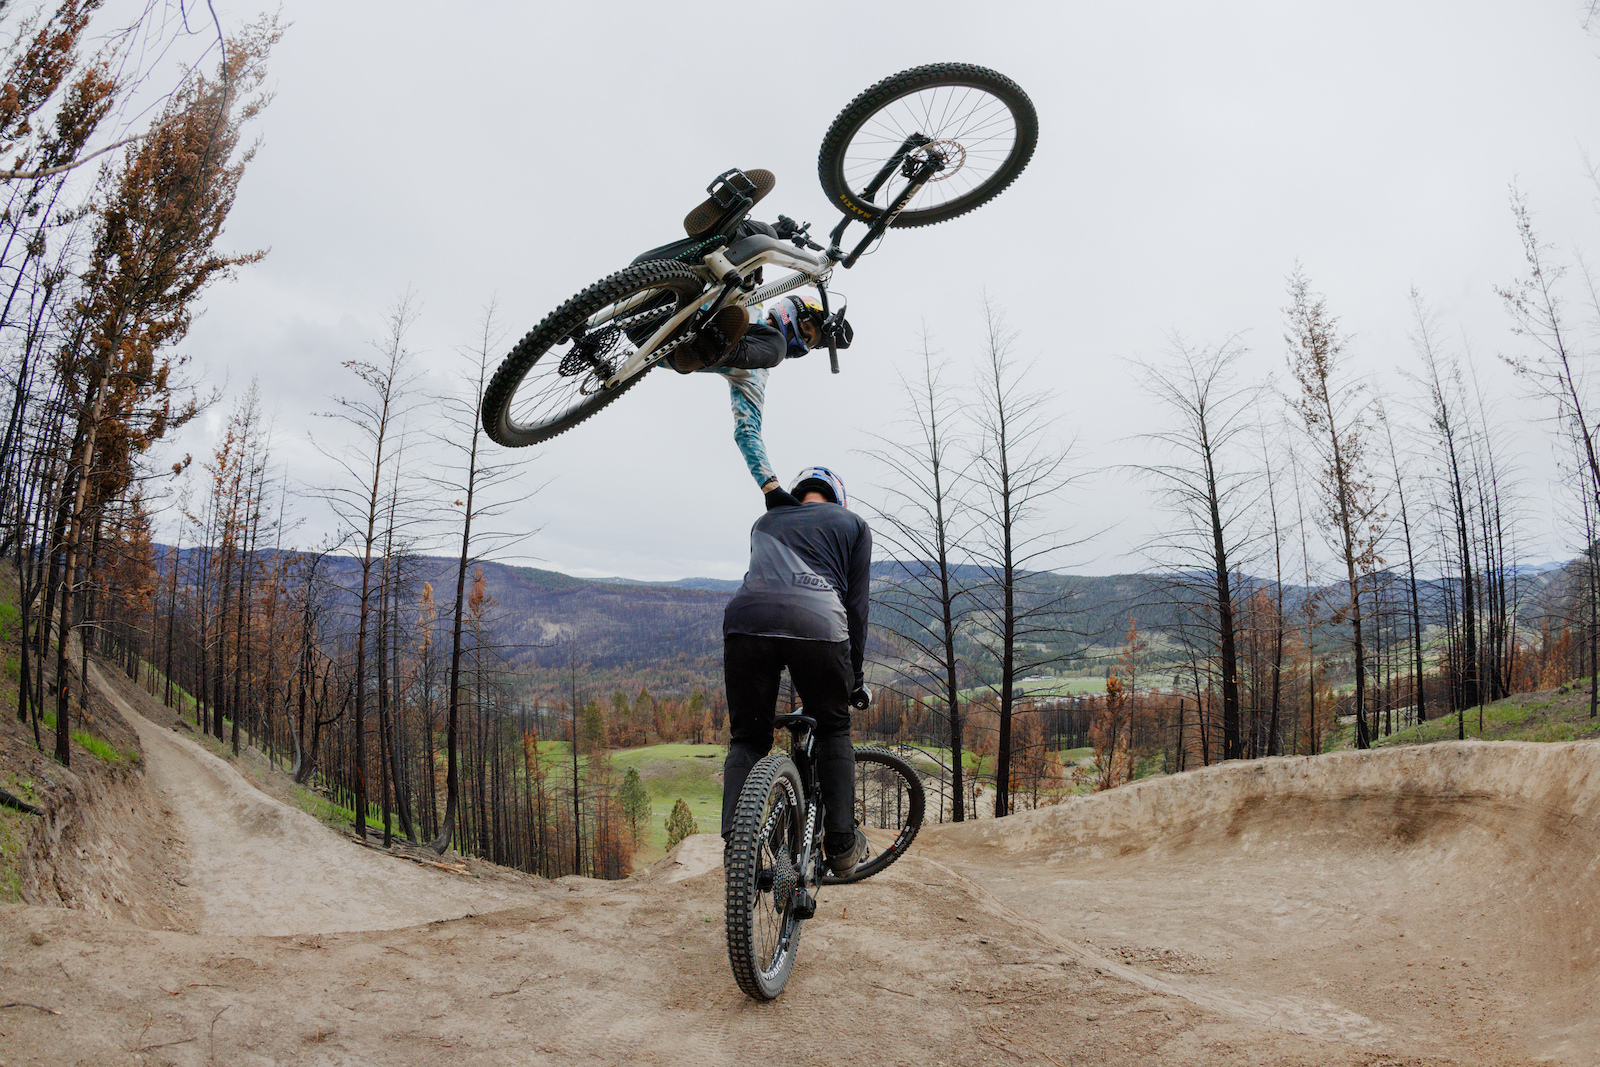 Brandon Semenuk and Kade Edwards Riding during Parallel in Falkland Canada on May 4th 2022